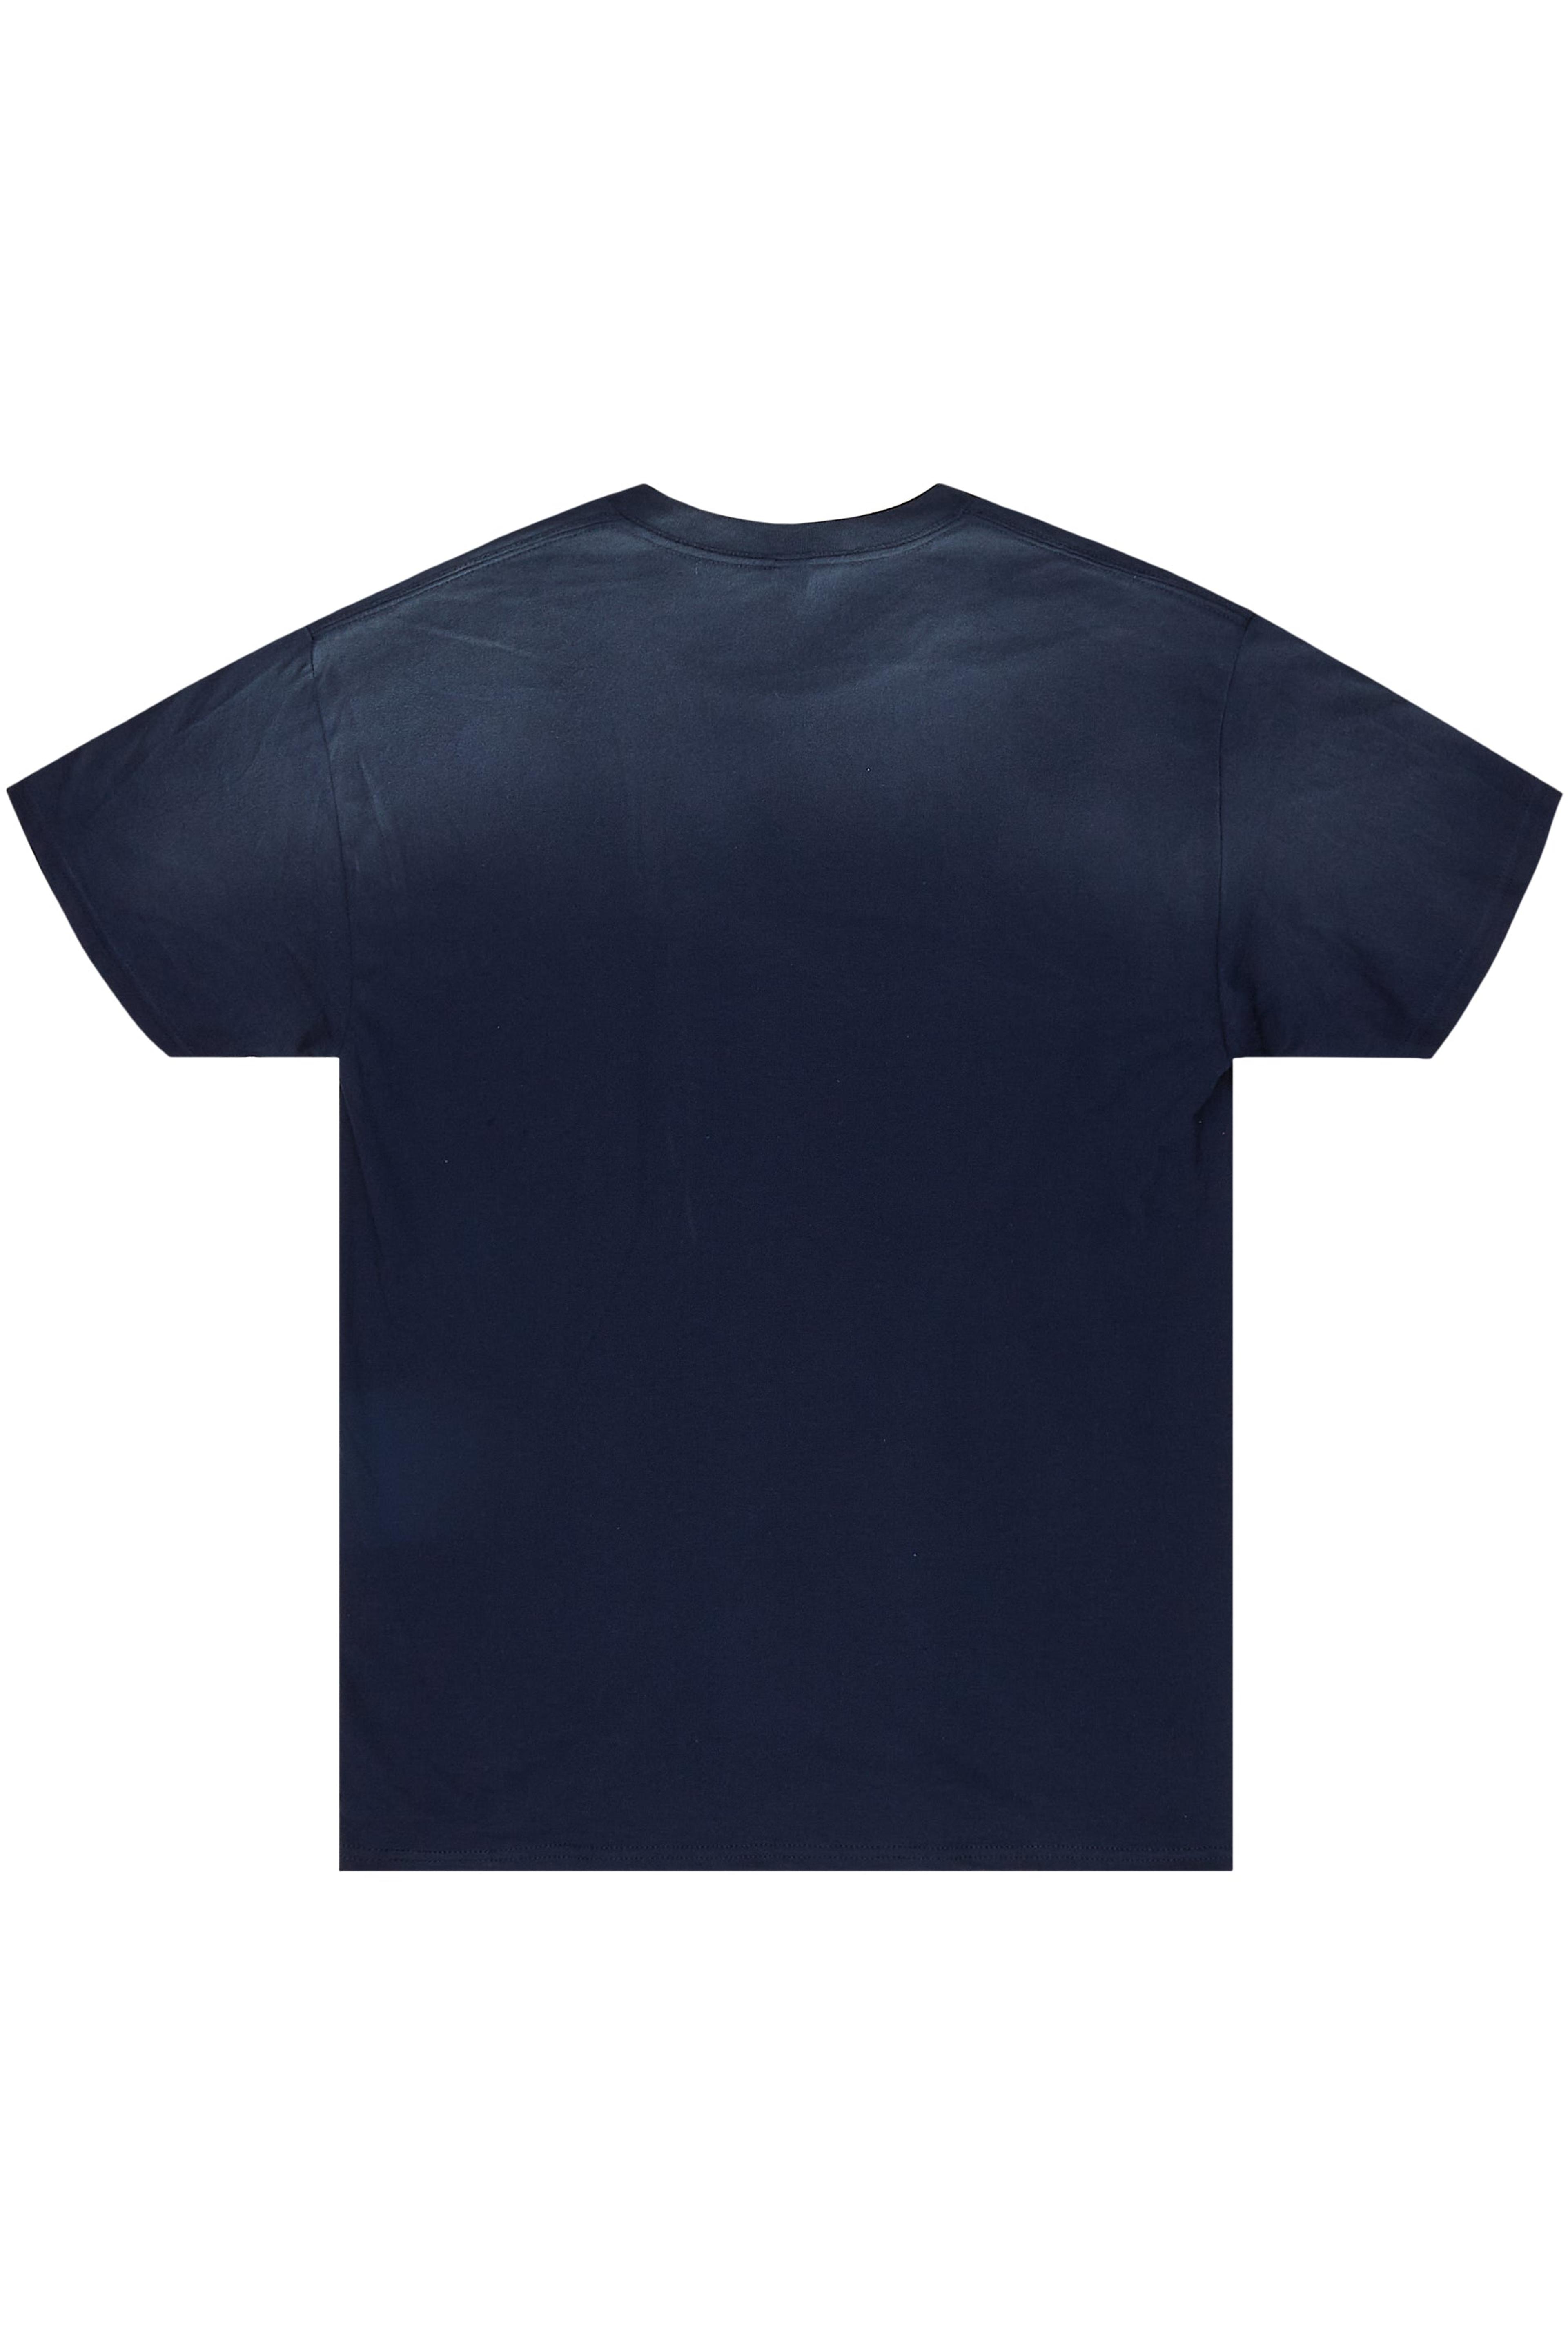 Alternate View 2 of Palmer Navy Graphic T-Shirt